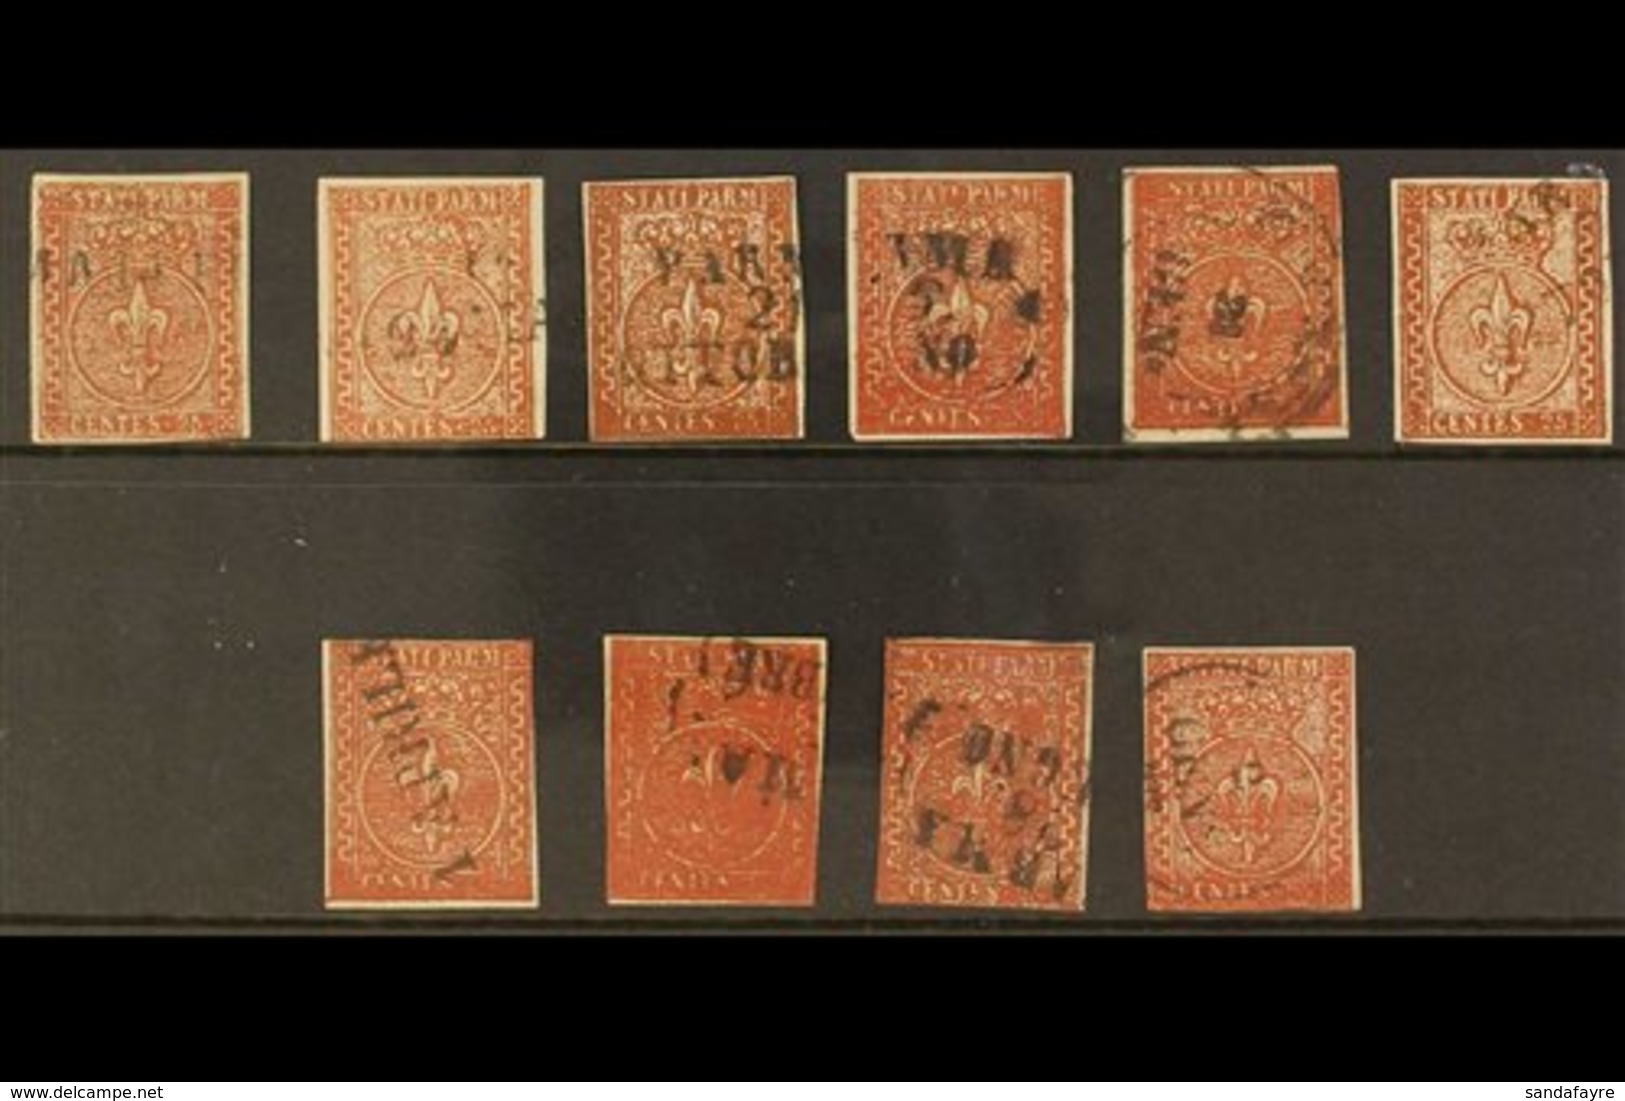 \Y PARMA\Y 1853 25c Brown Red, Sass 8, Good To Fine Used Group Of Used Stamps, Some With Full Margins Showing A Range Of - Unclassified